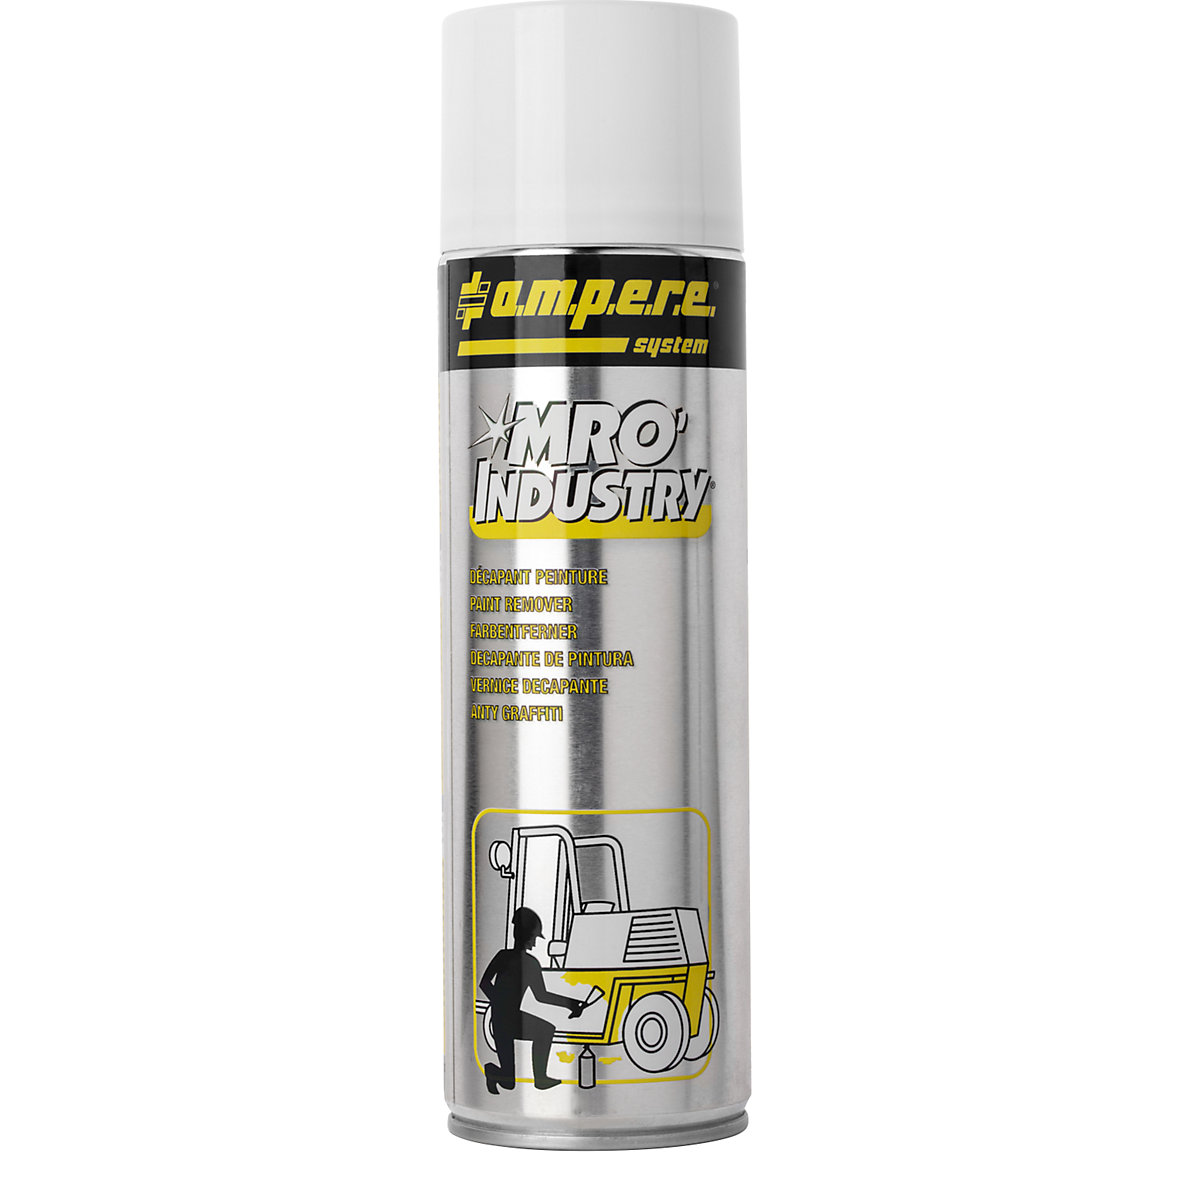 MRO Industry® paint remover – Ampere